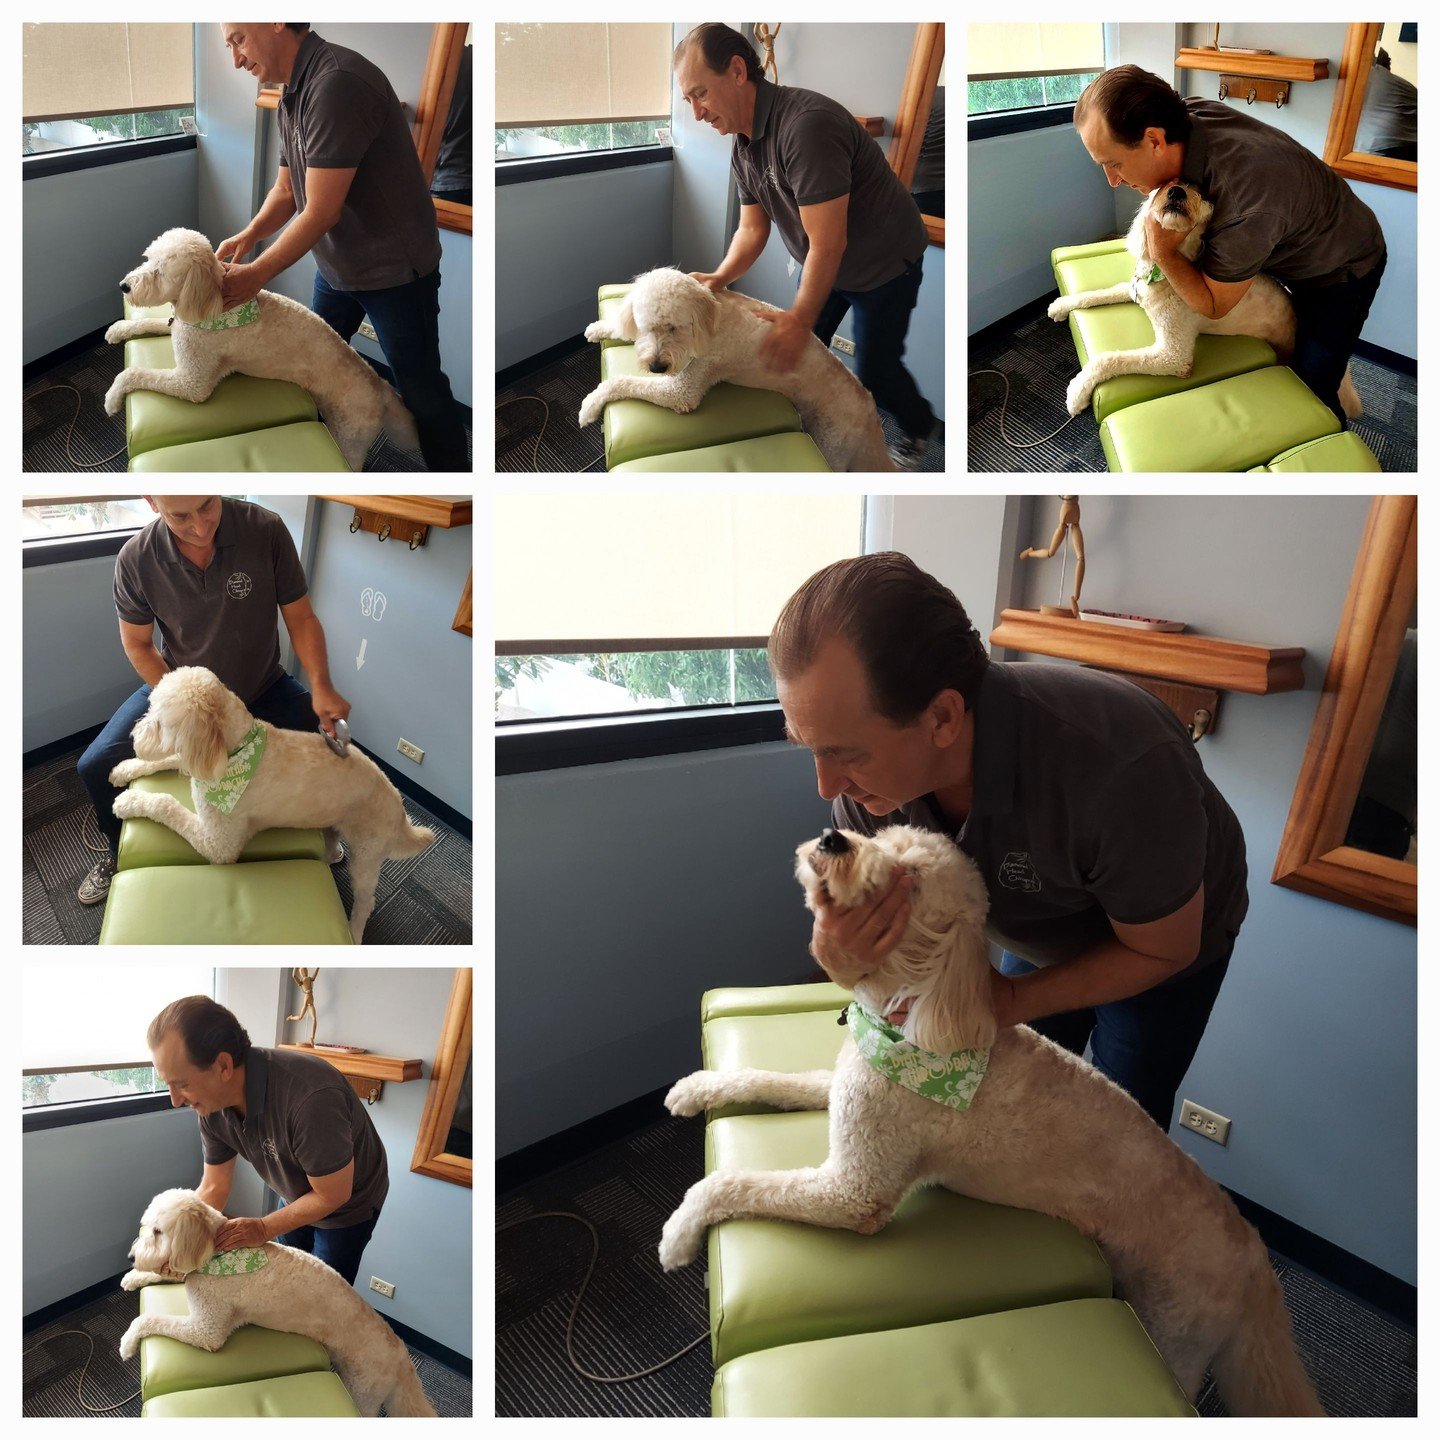 Koa feels so much better after his adjustment -- Now it's your turn! Call us or schedule online at WWW.DHCHI.COM to come see Dr. Jesse and Koa soon!